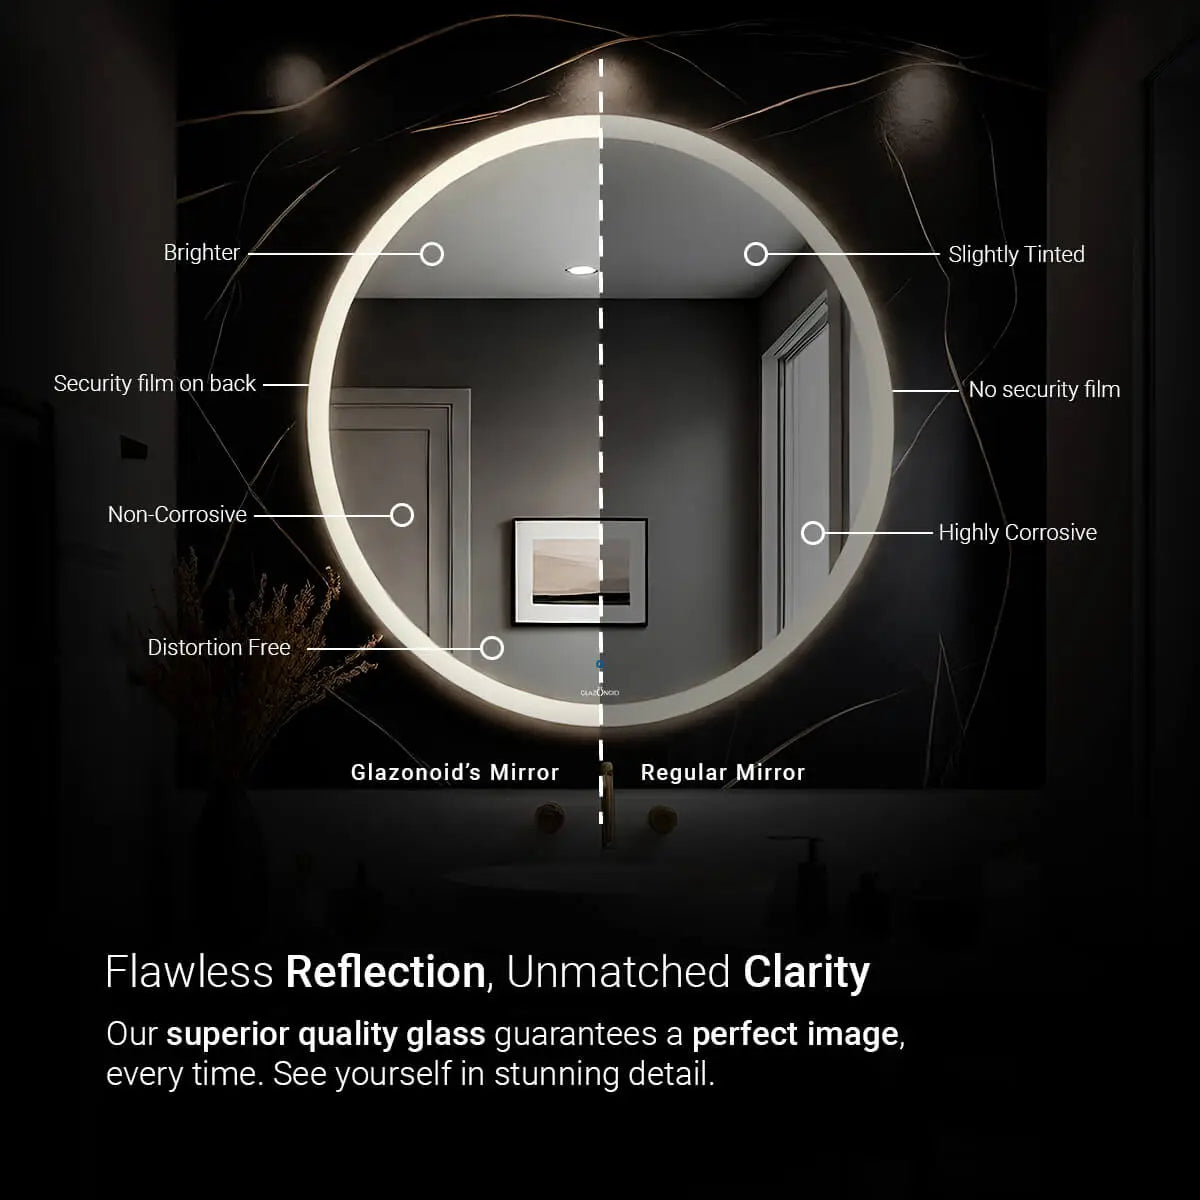 Wall-mounted, circular bathroom mirror with a safety film backing. This mirror is made from high-quality glass and offers a distortion-free and crystal-clear reflection.